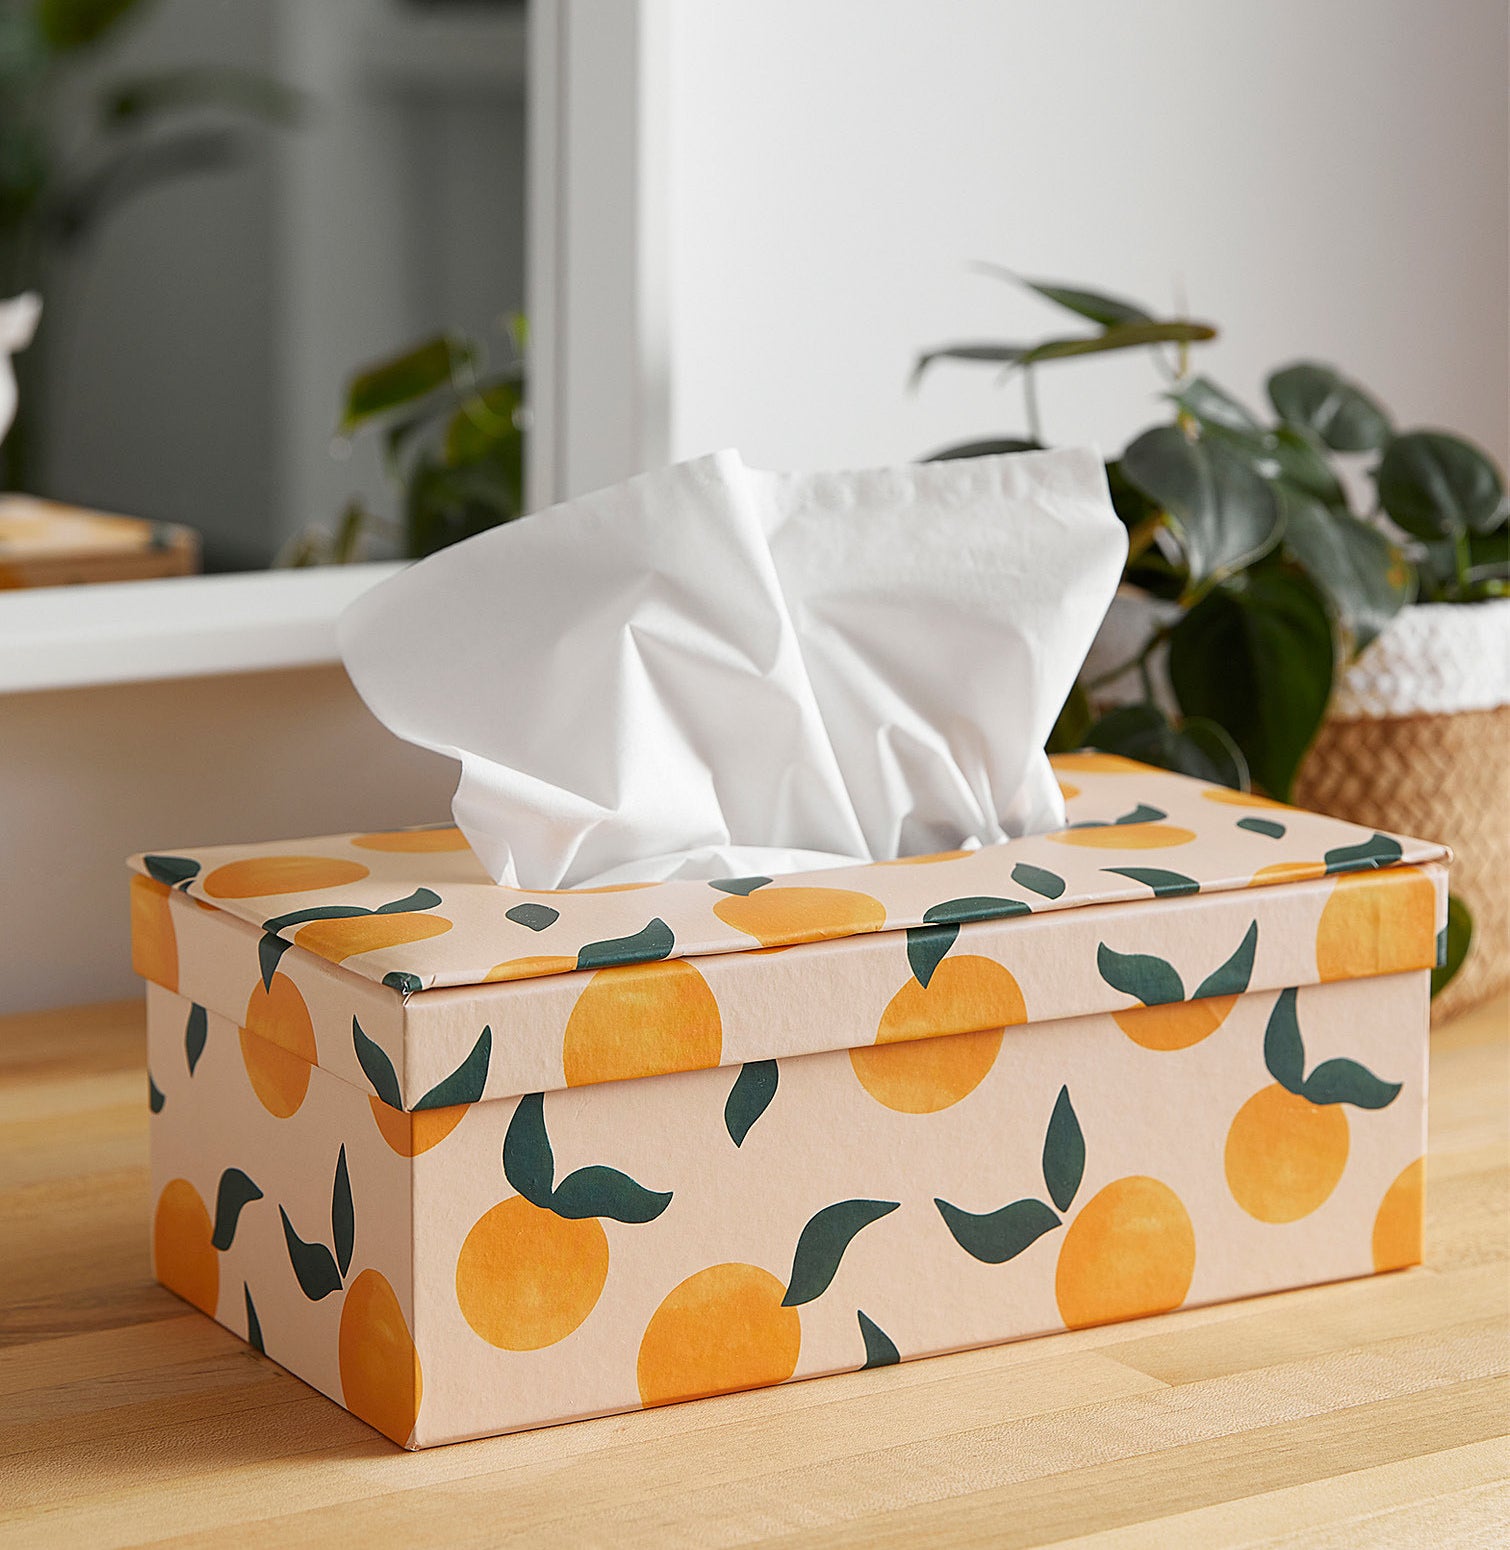 a tissue box holder with tissues inside on a table